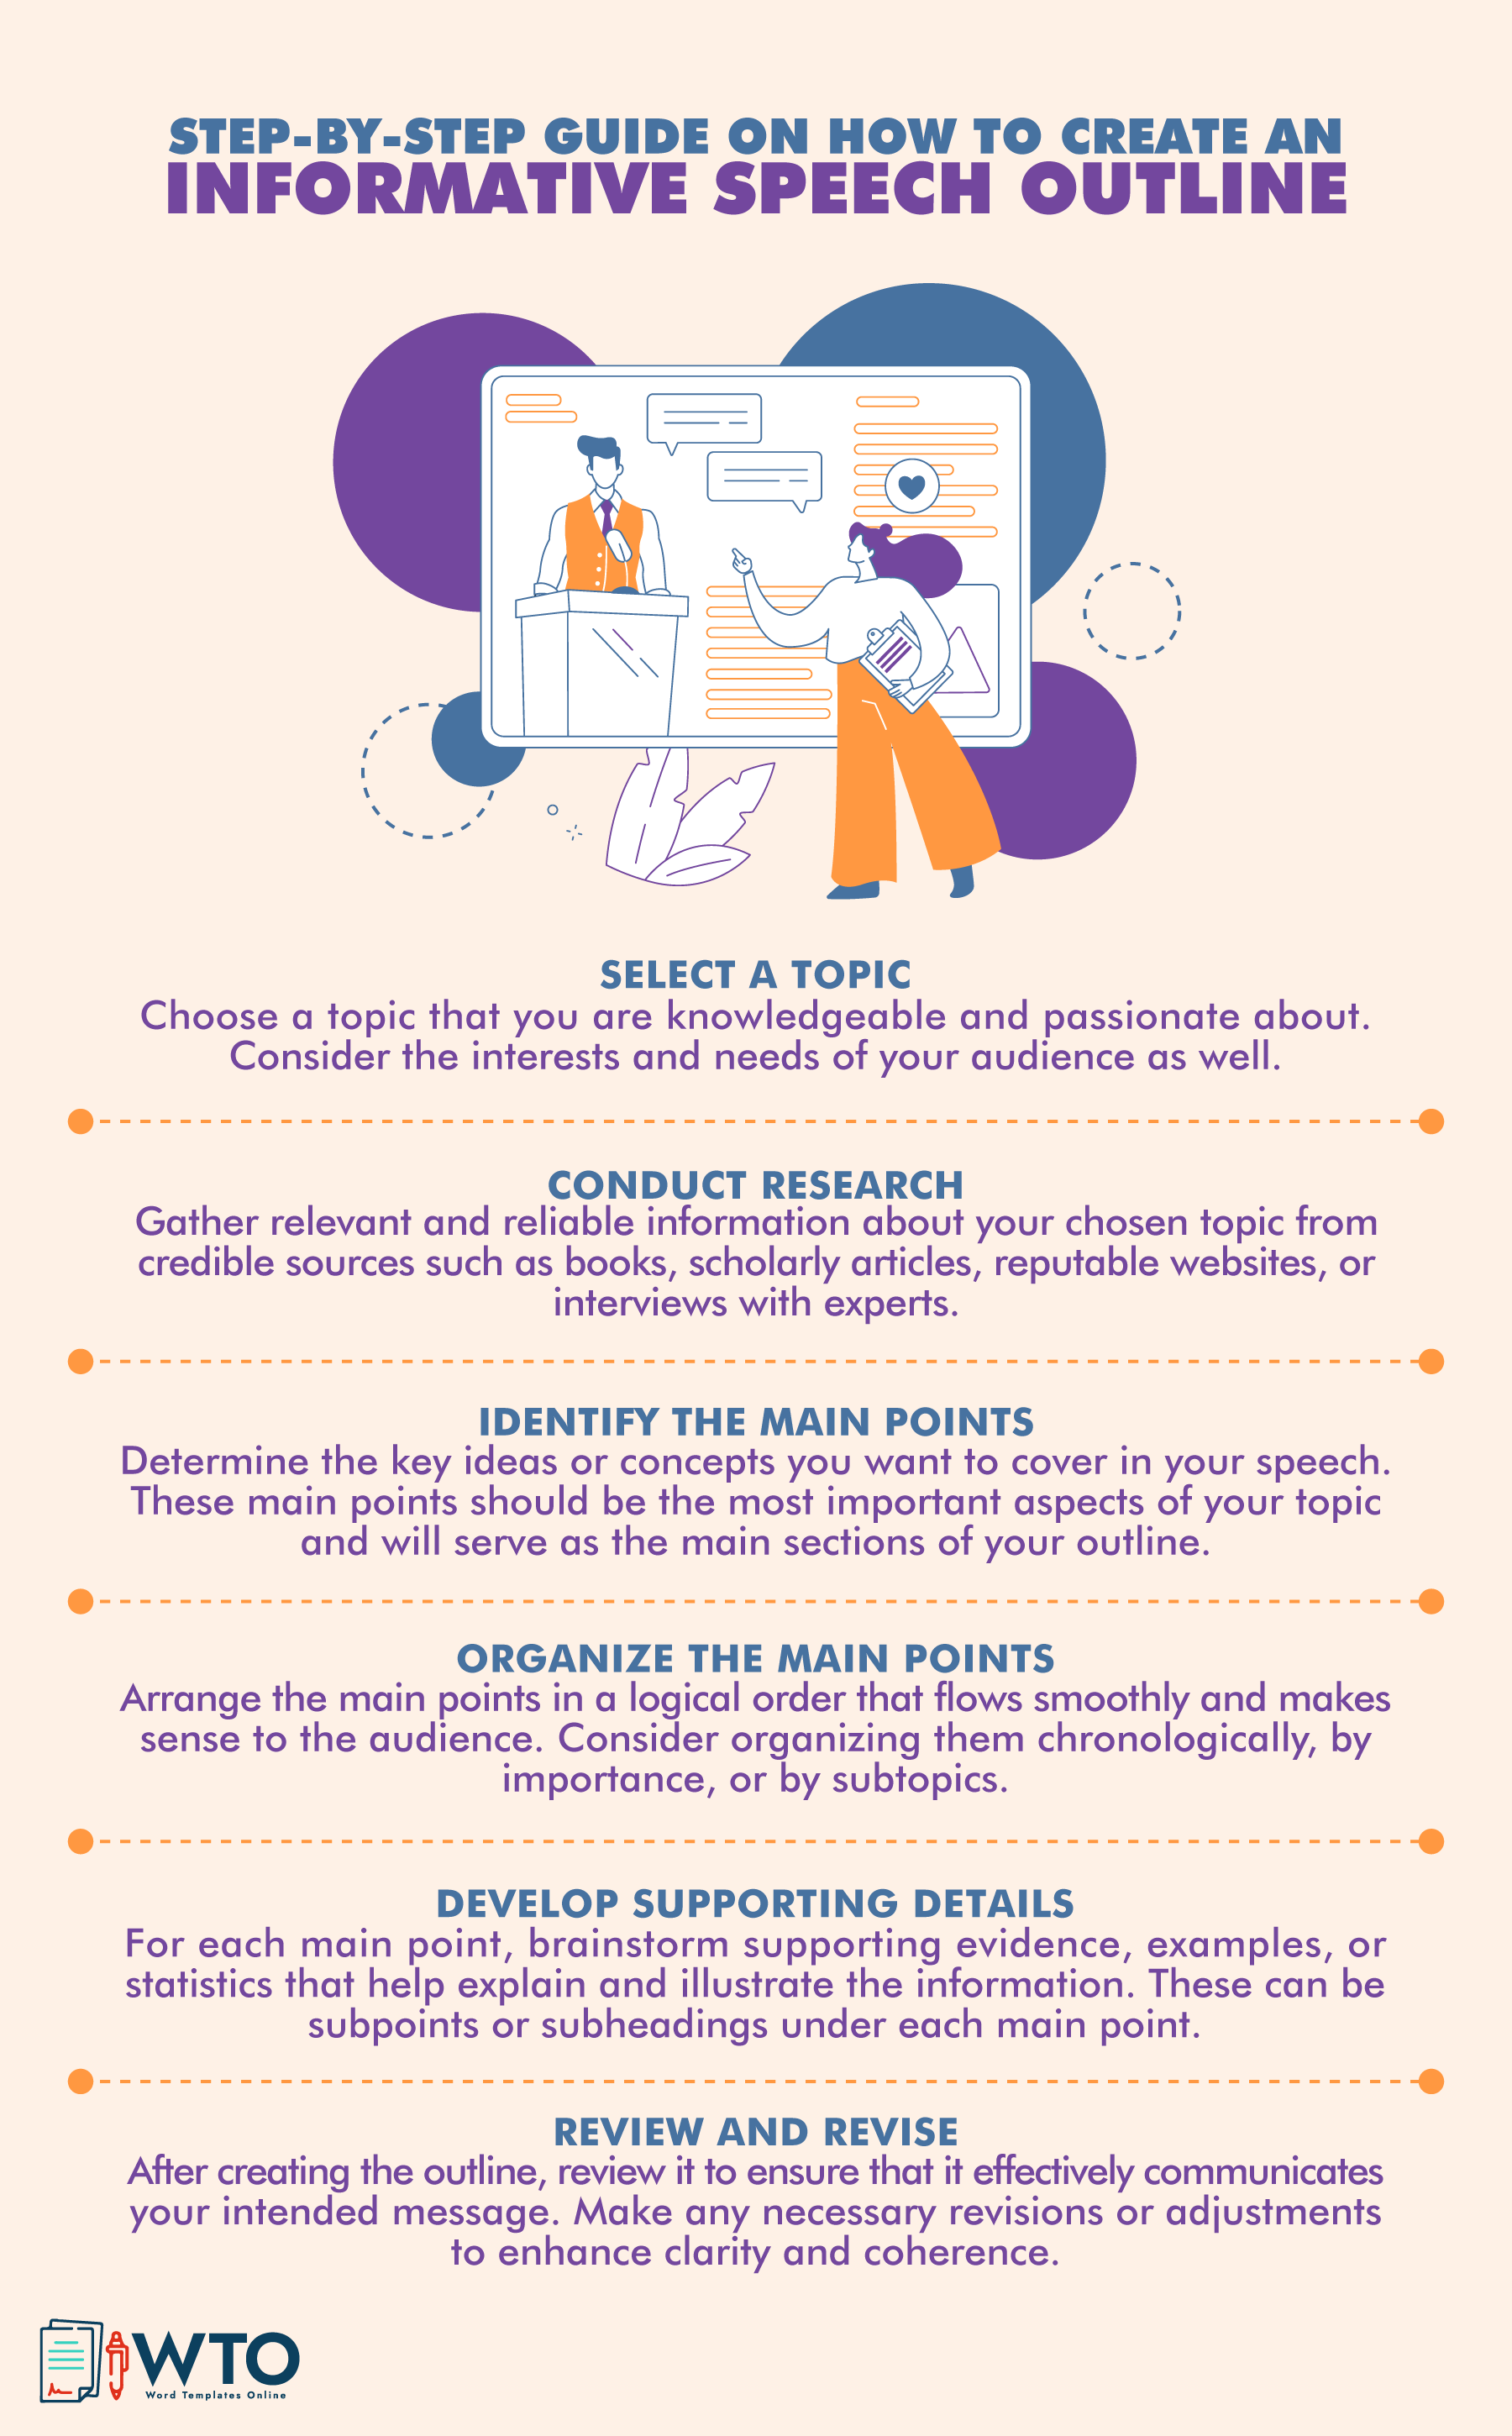 This infographic is about the step by step guide to create the outline.